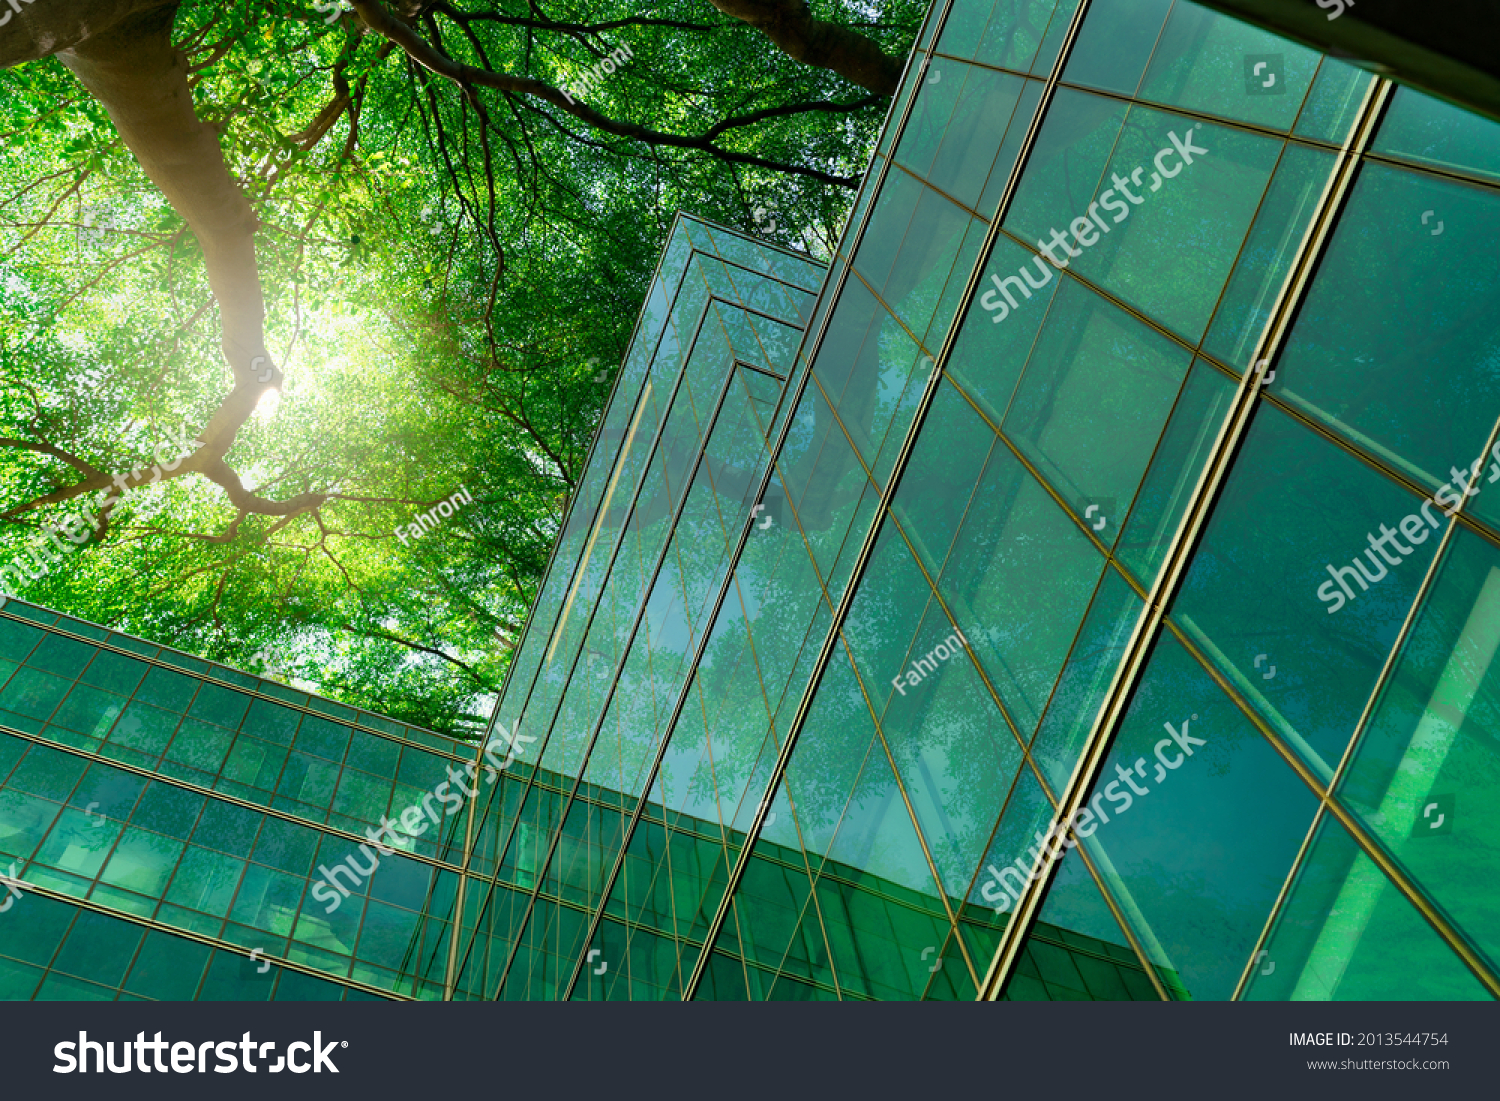 Eco-friendly building in the modern city. Green tree branches with leaves and sustainable glass building for reducing heat and carbon dioxide. Office building with green environment. Go green concept. #2013544754